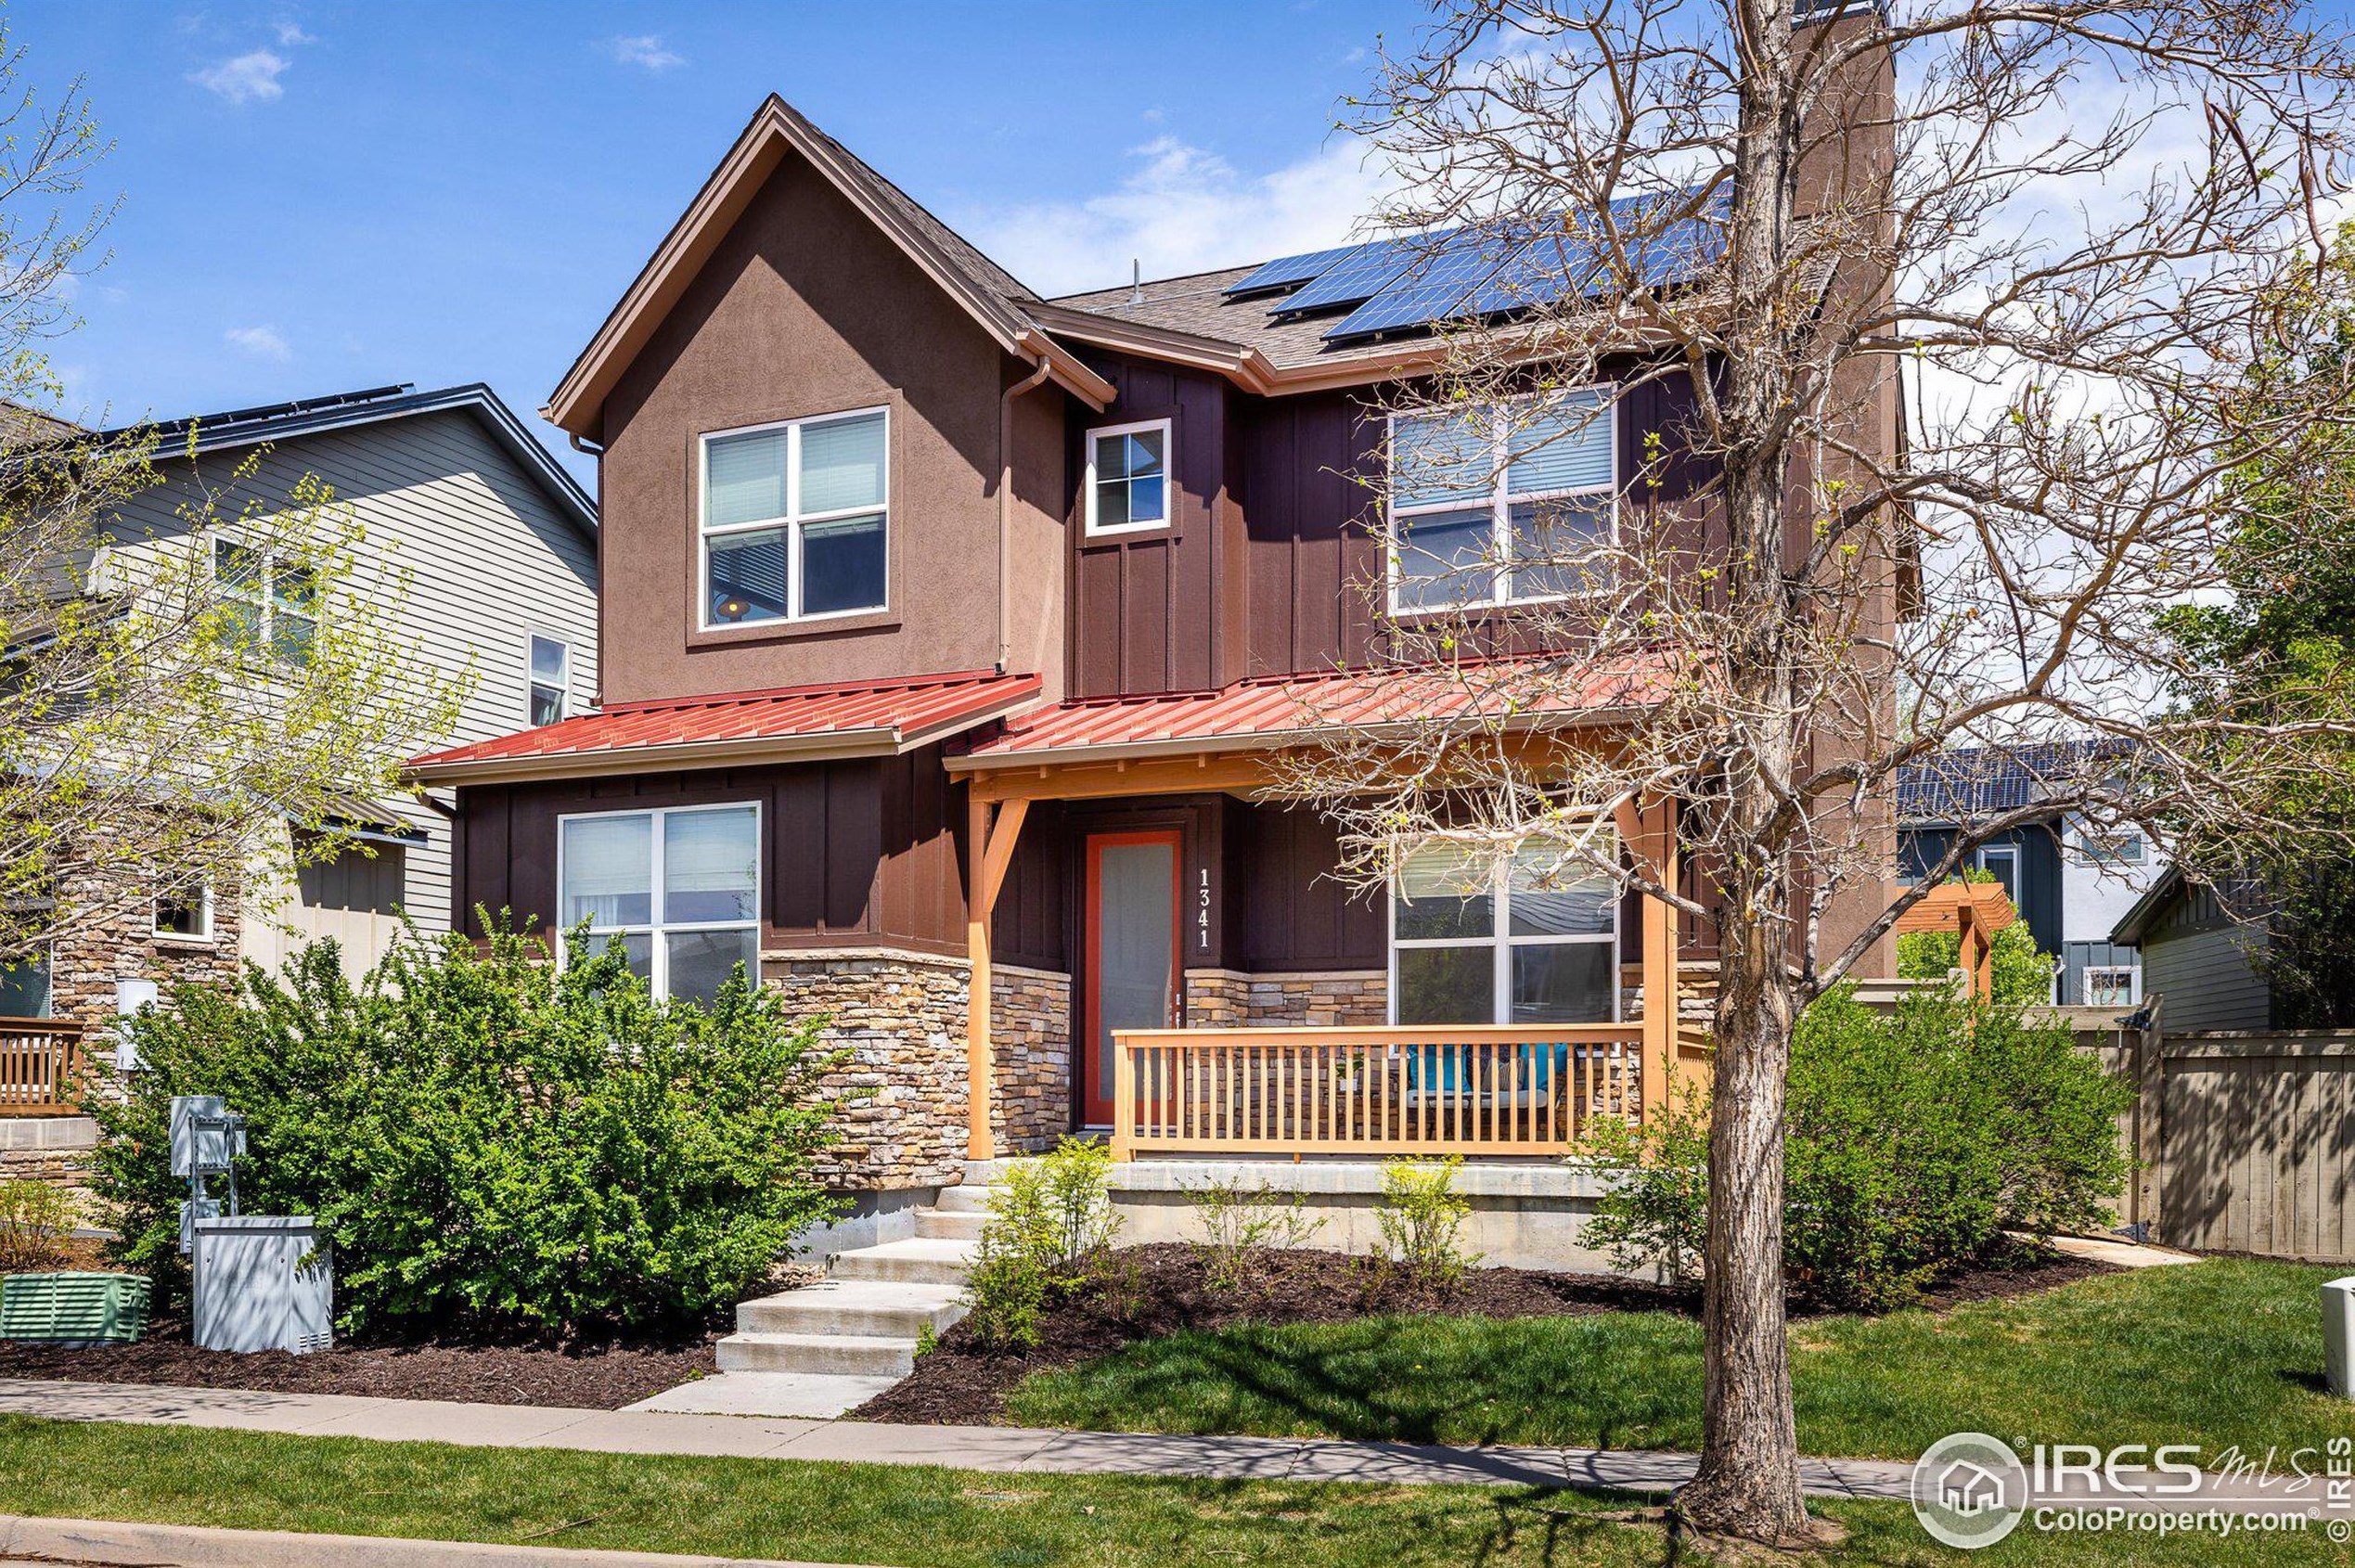 1341 Snowberry Ln, Westminster, CO 80027